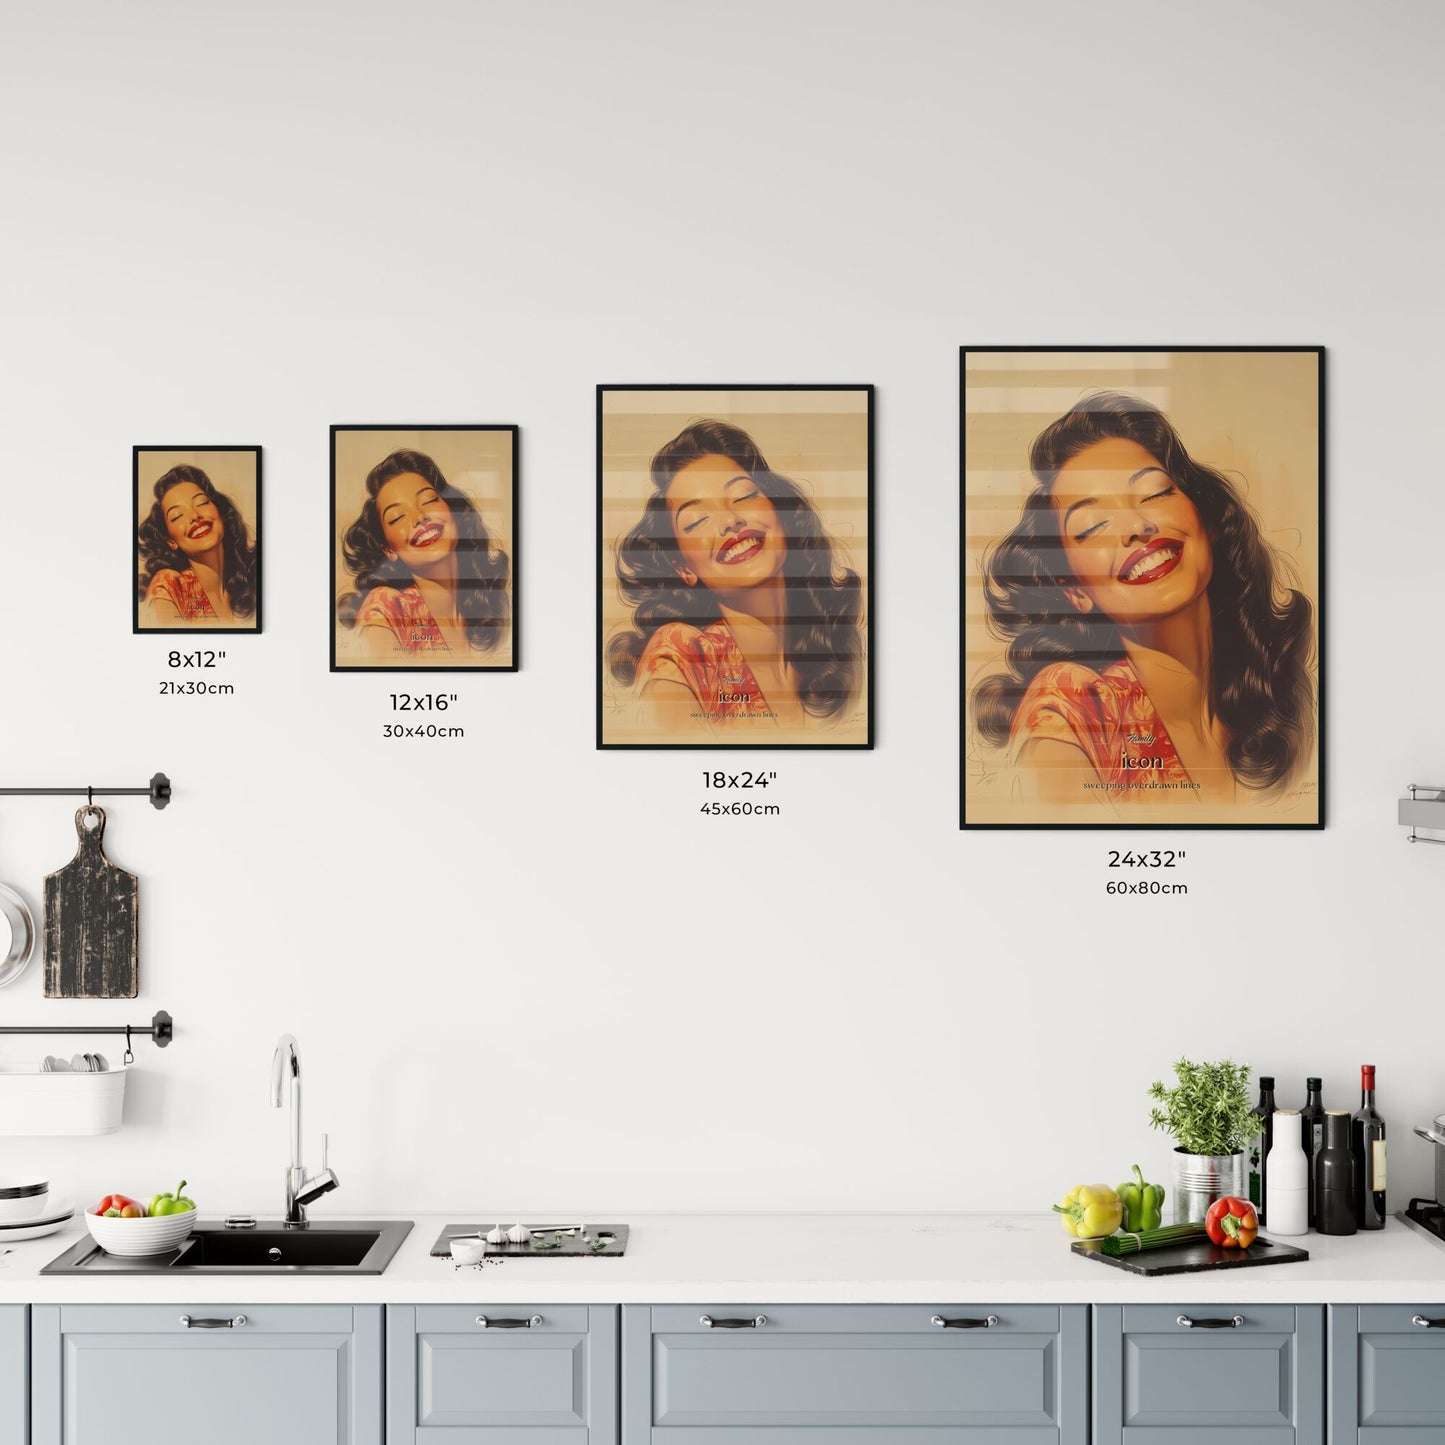 Family, icon, sweeping overdrawn lines, A Poster of a woman with long hair and red lipstick smiling Default Title